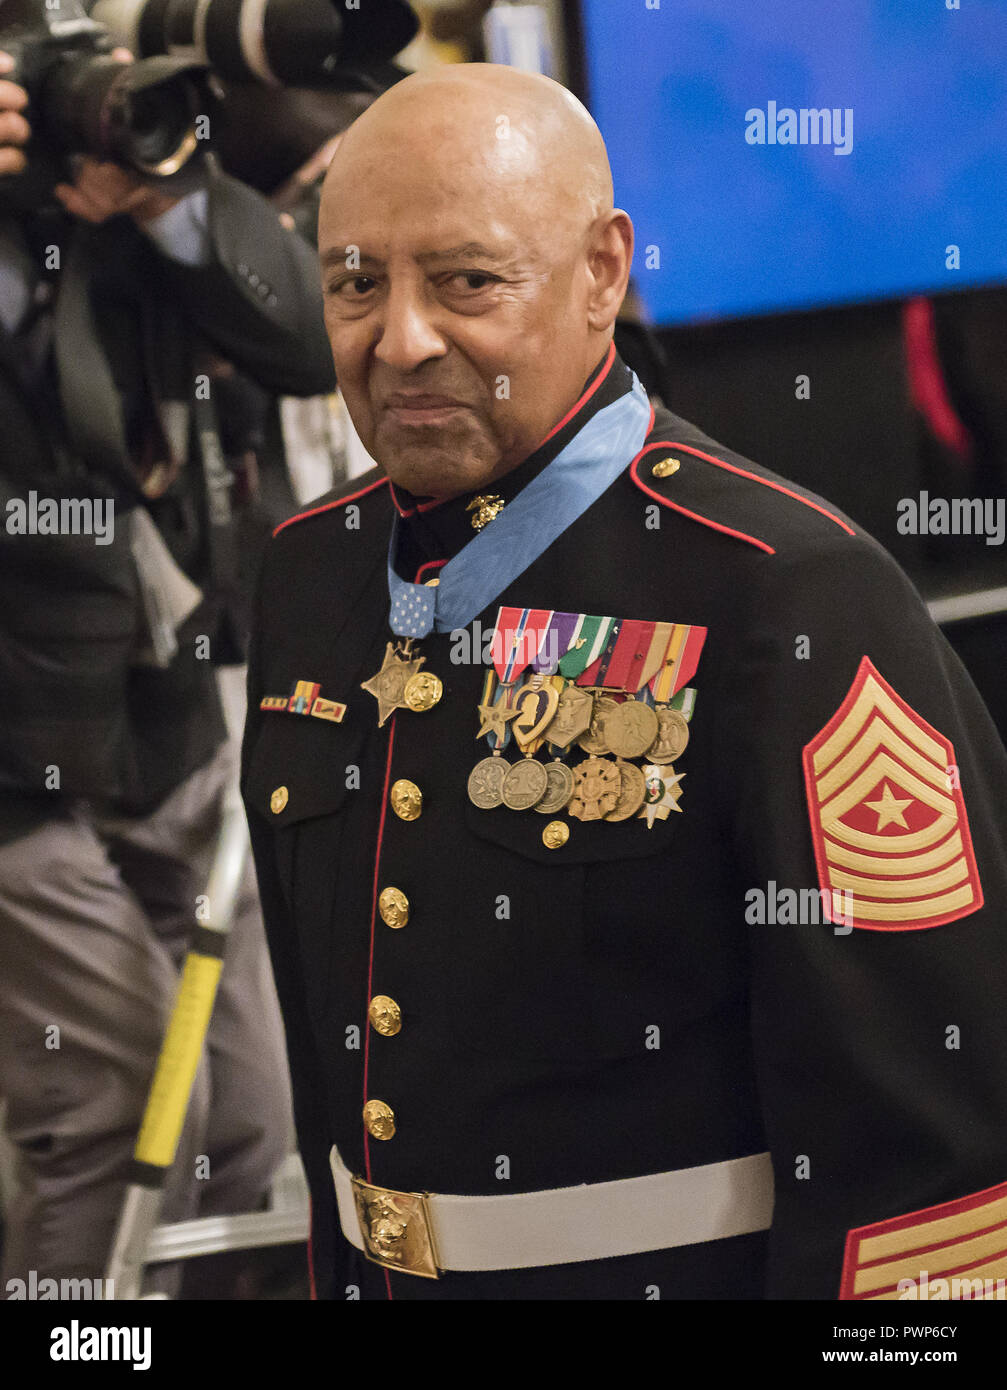 Washington, District of Columbia, USA. 17th Oct, 2018. Sergeant Major John L. Canley, United States Marine Corps (Retired) departs following the ceremony where US President Donald J. Trump awarded him the Medal of Honor for conspicuous gallantry during the Vietnam War in a ceremony in the East Room of the the White House in Washington, DC on Wednesday, October 17, 2018 Credit: Ron Sachs/CNP/ZUMA Wire/Alamy Live News Stock Photo